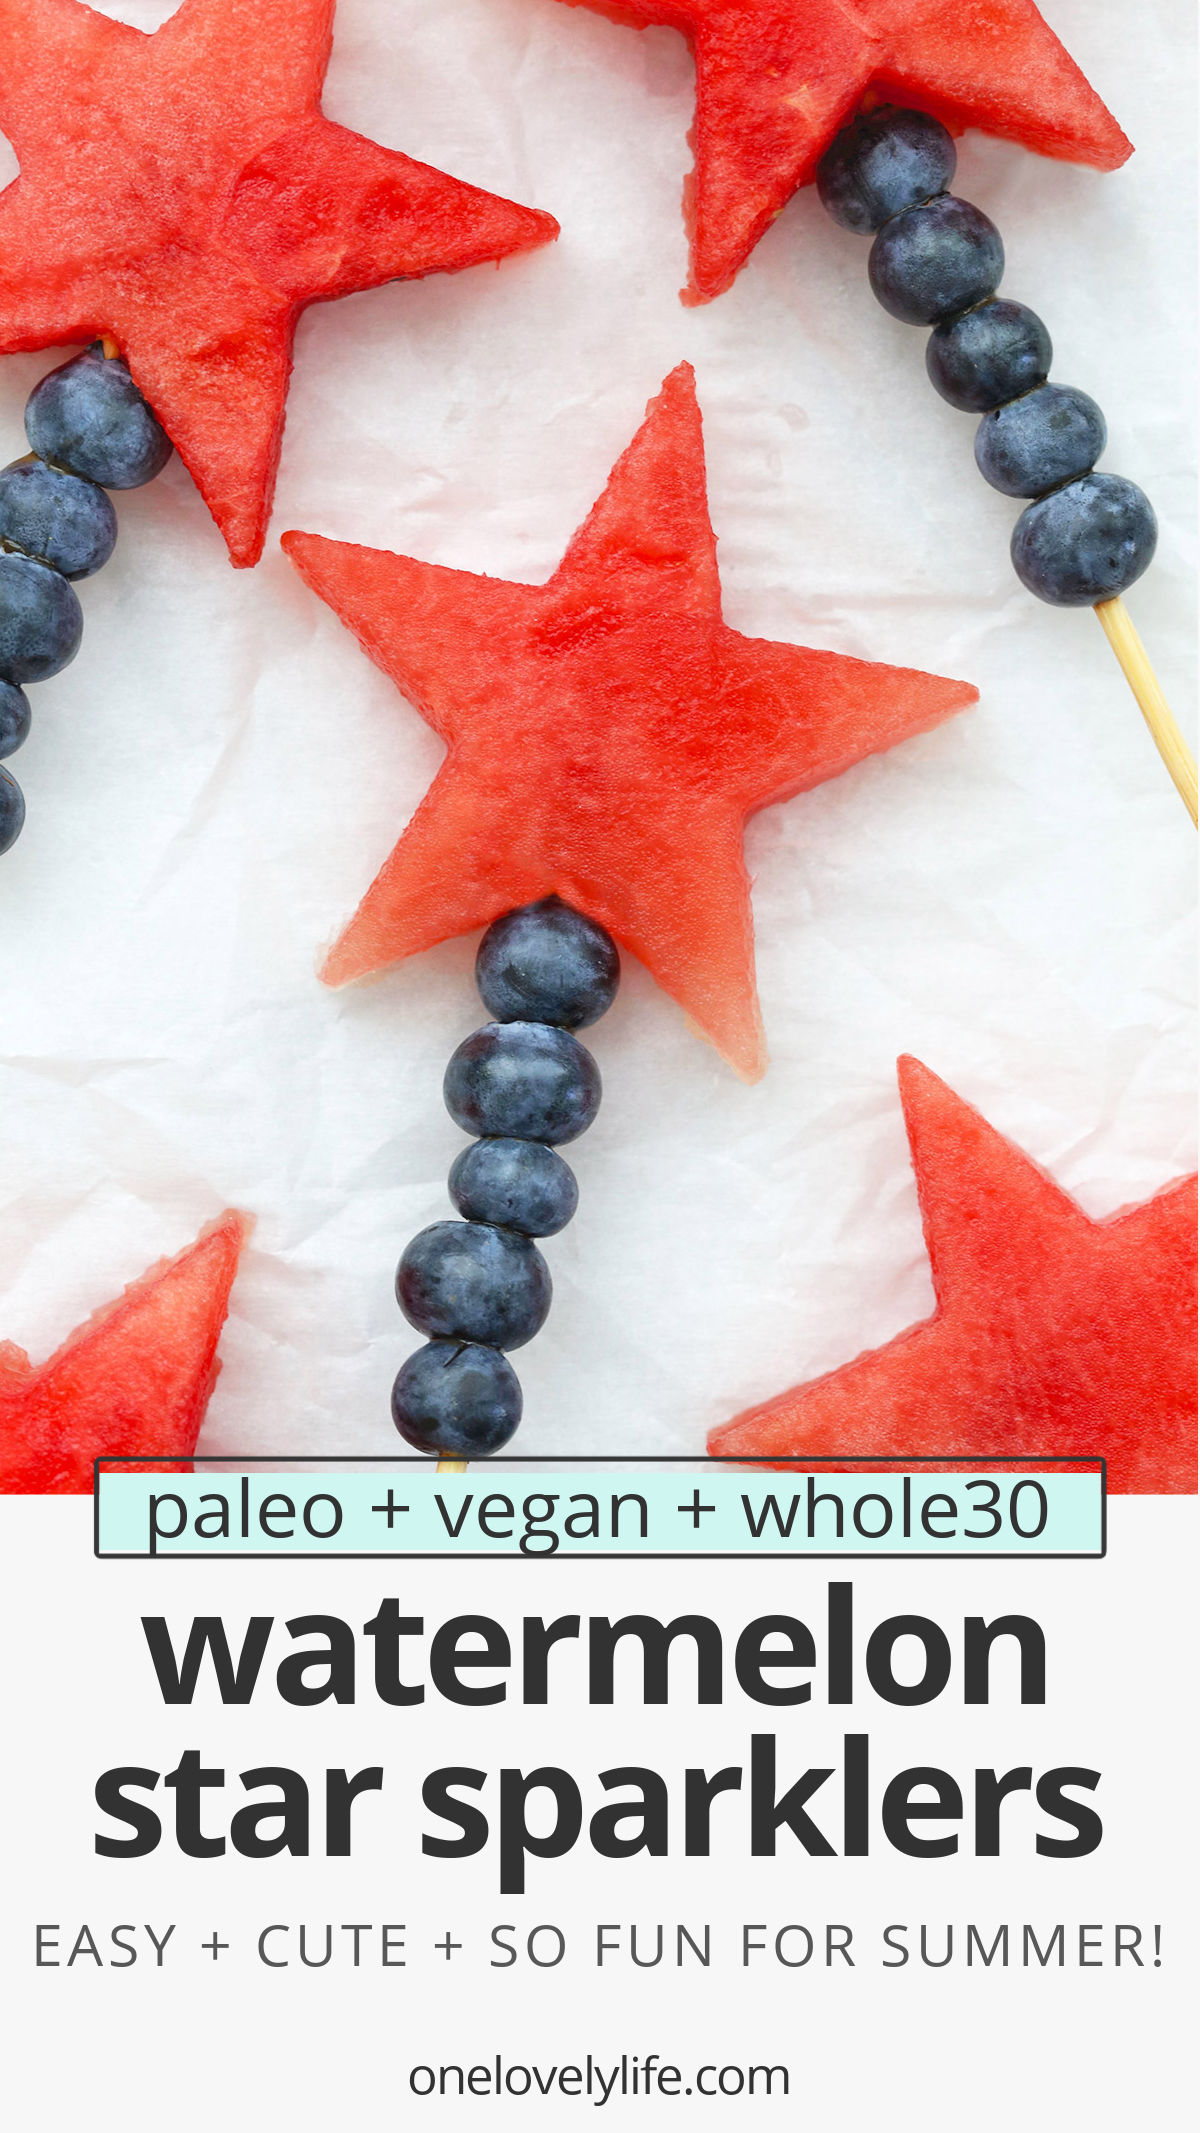 Watermelon Star Sparklers - Watermelon stars and blueberries combine to make these fun, patriotic fruit sparklers. They're a perfect, easy snack or summer side dish. (Naturally Paleo, Vegan & Gluten-Free) // Patriotic Fruit Skewers // 4th of July Side Dish // Red White and Blue Recipes #snack #4thofjuly #summerrecipe #sidedish #fruit #healthysnack